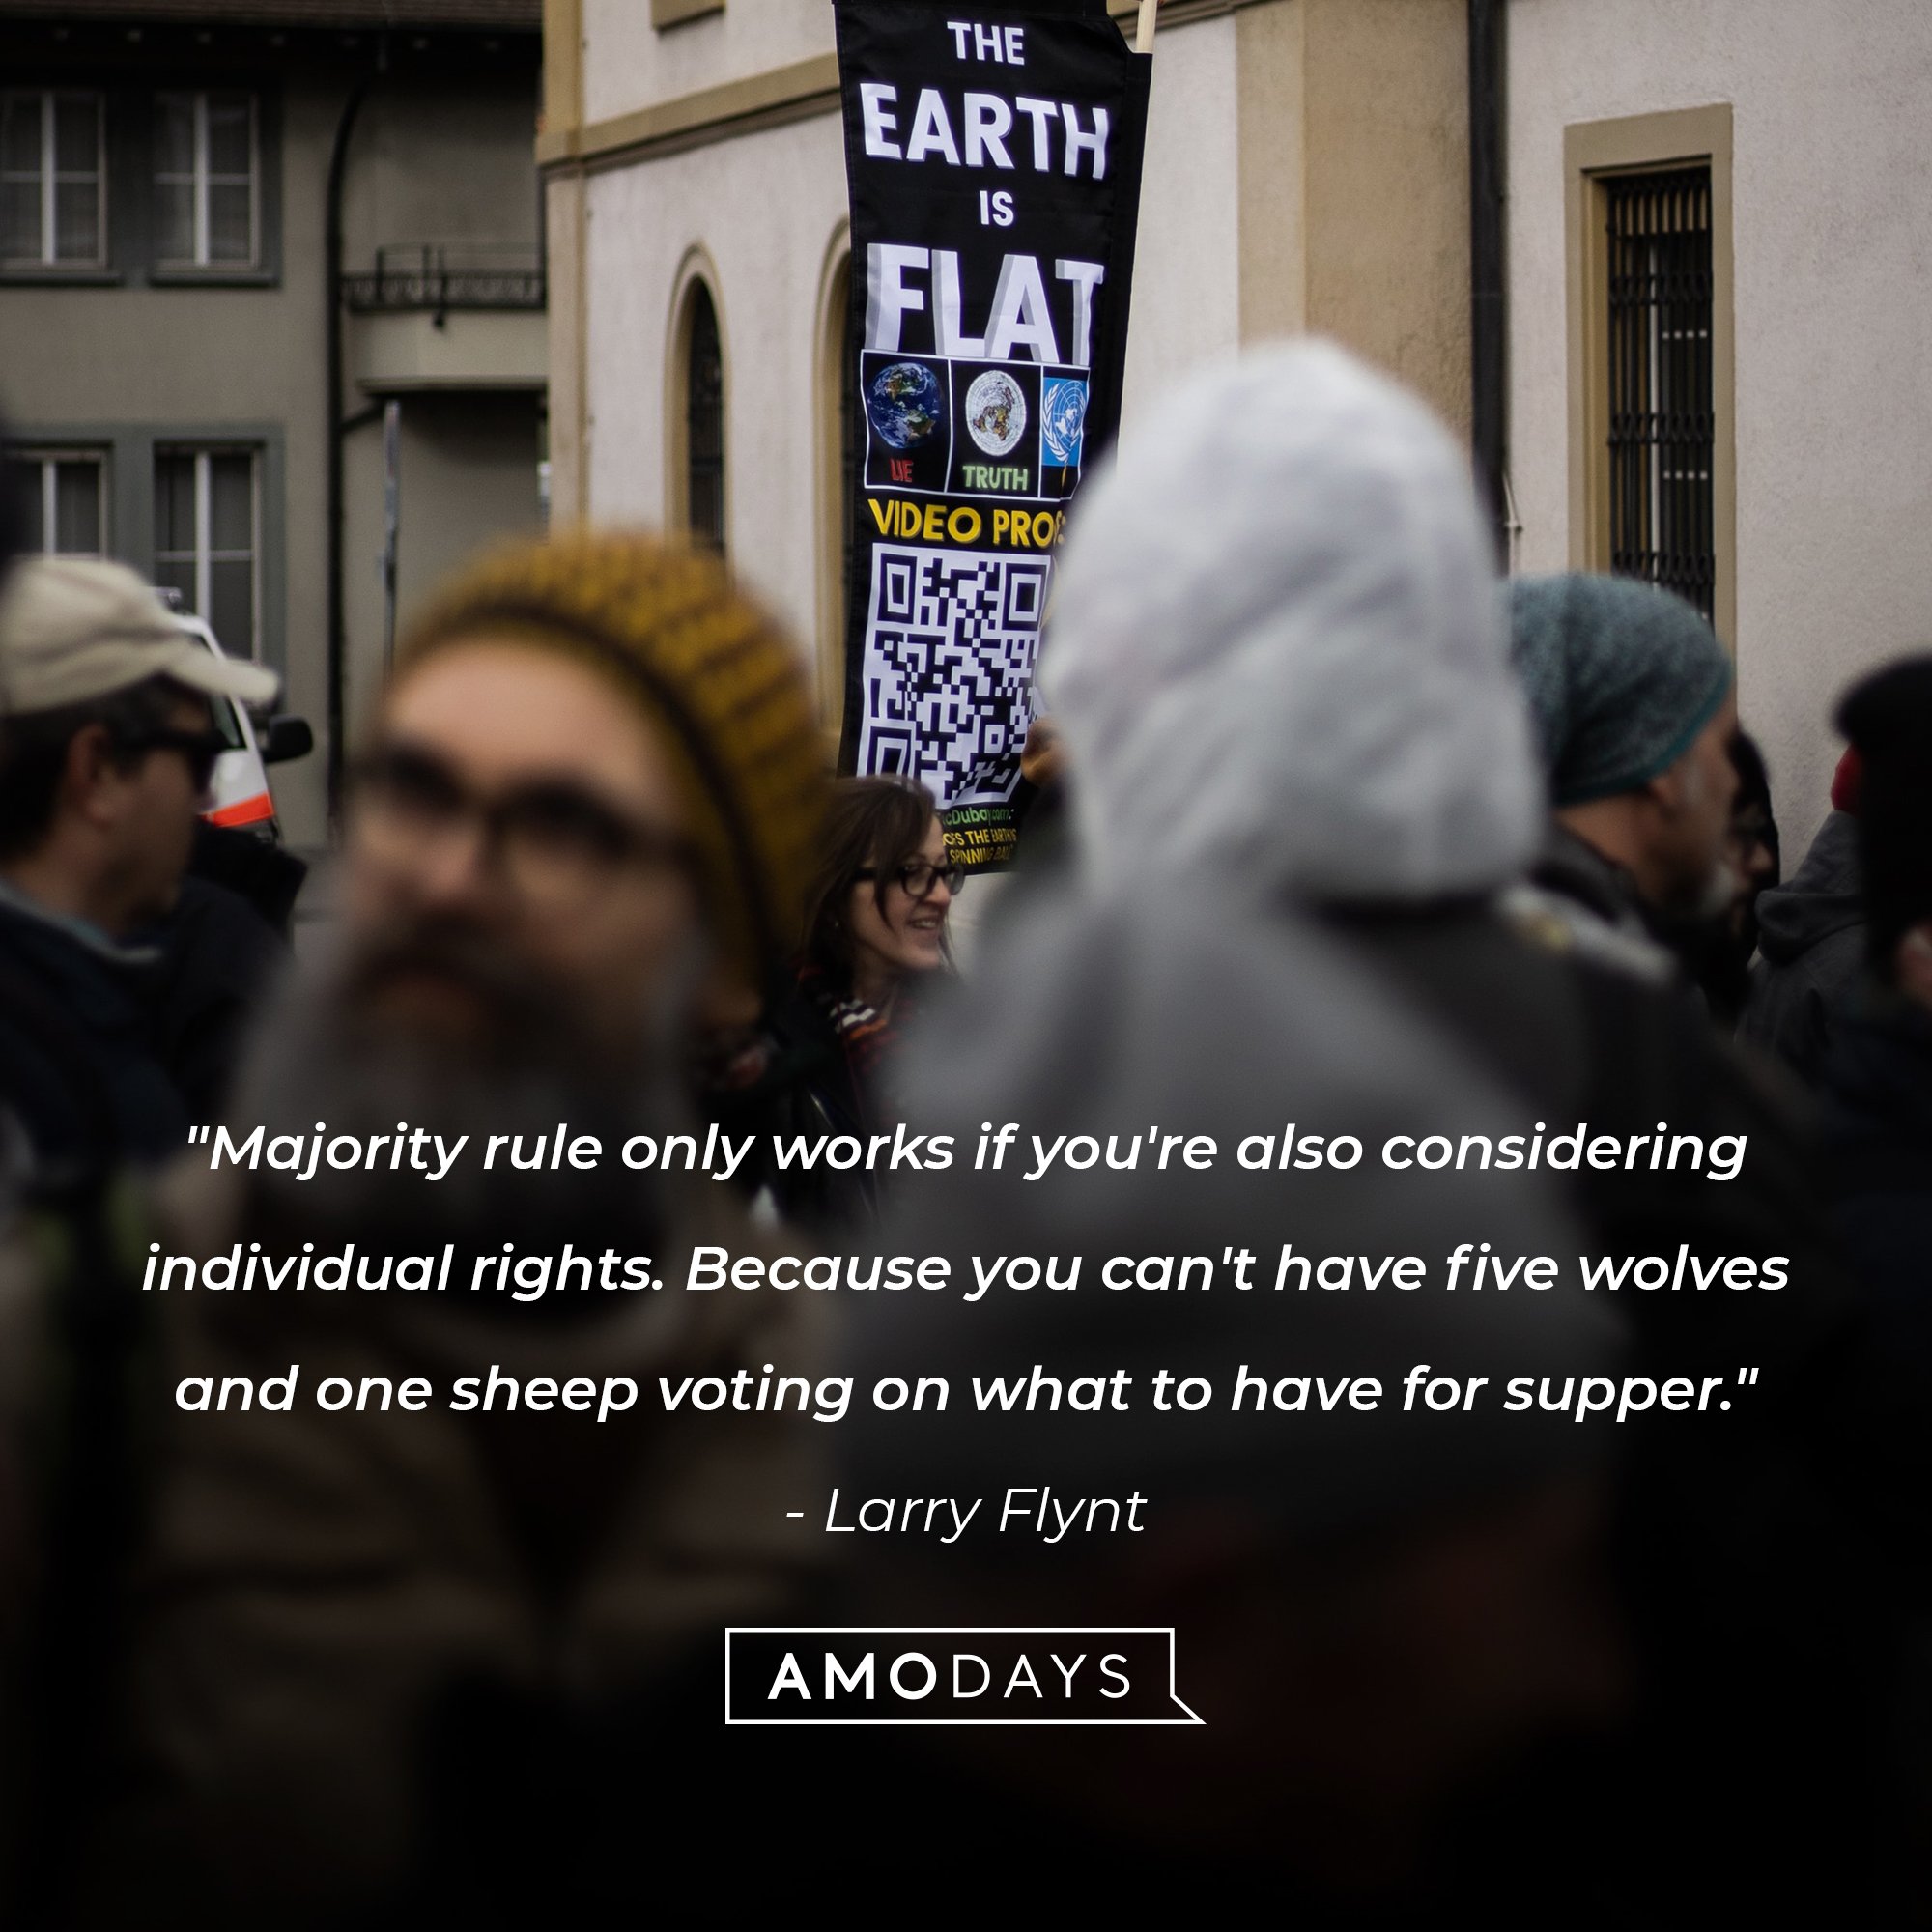 Larry Flynt's quote: "Majority rule only works if you're also considering individual rights. Because you can't have five wolves and one sheep voting on what to have for supper." | Image: AmoDays